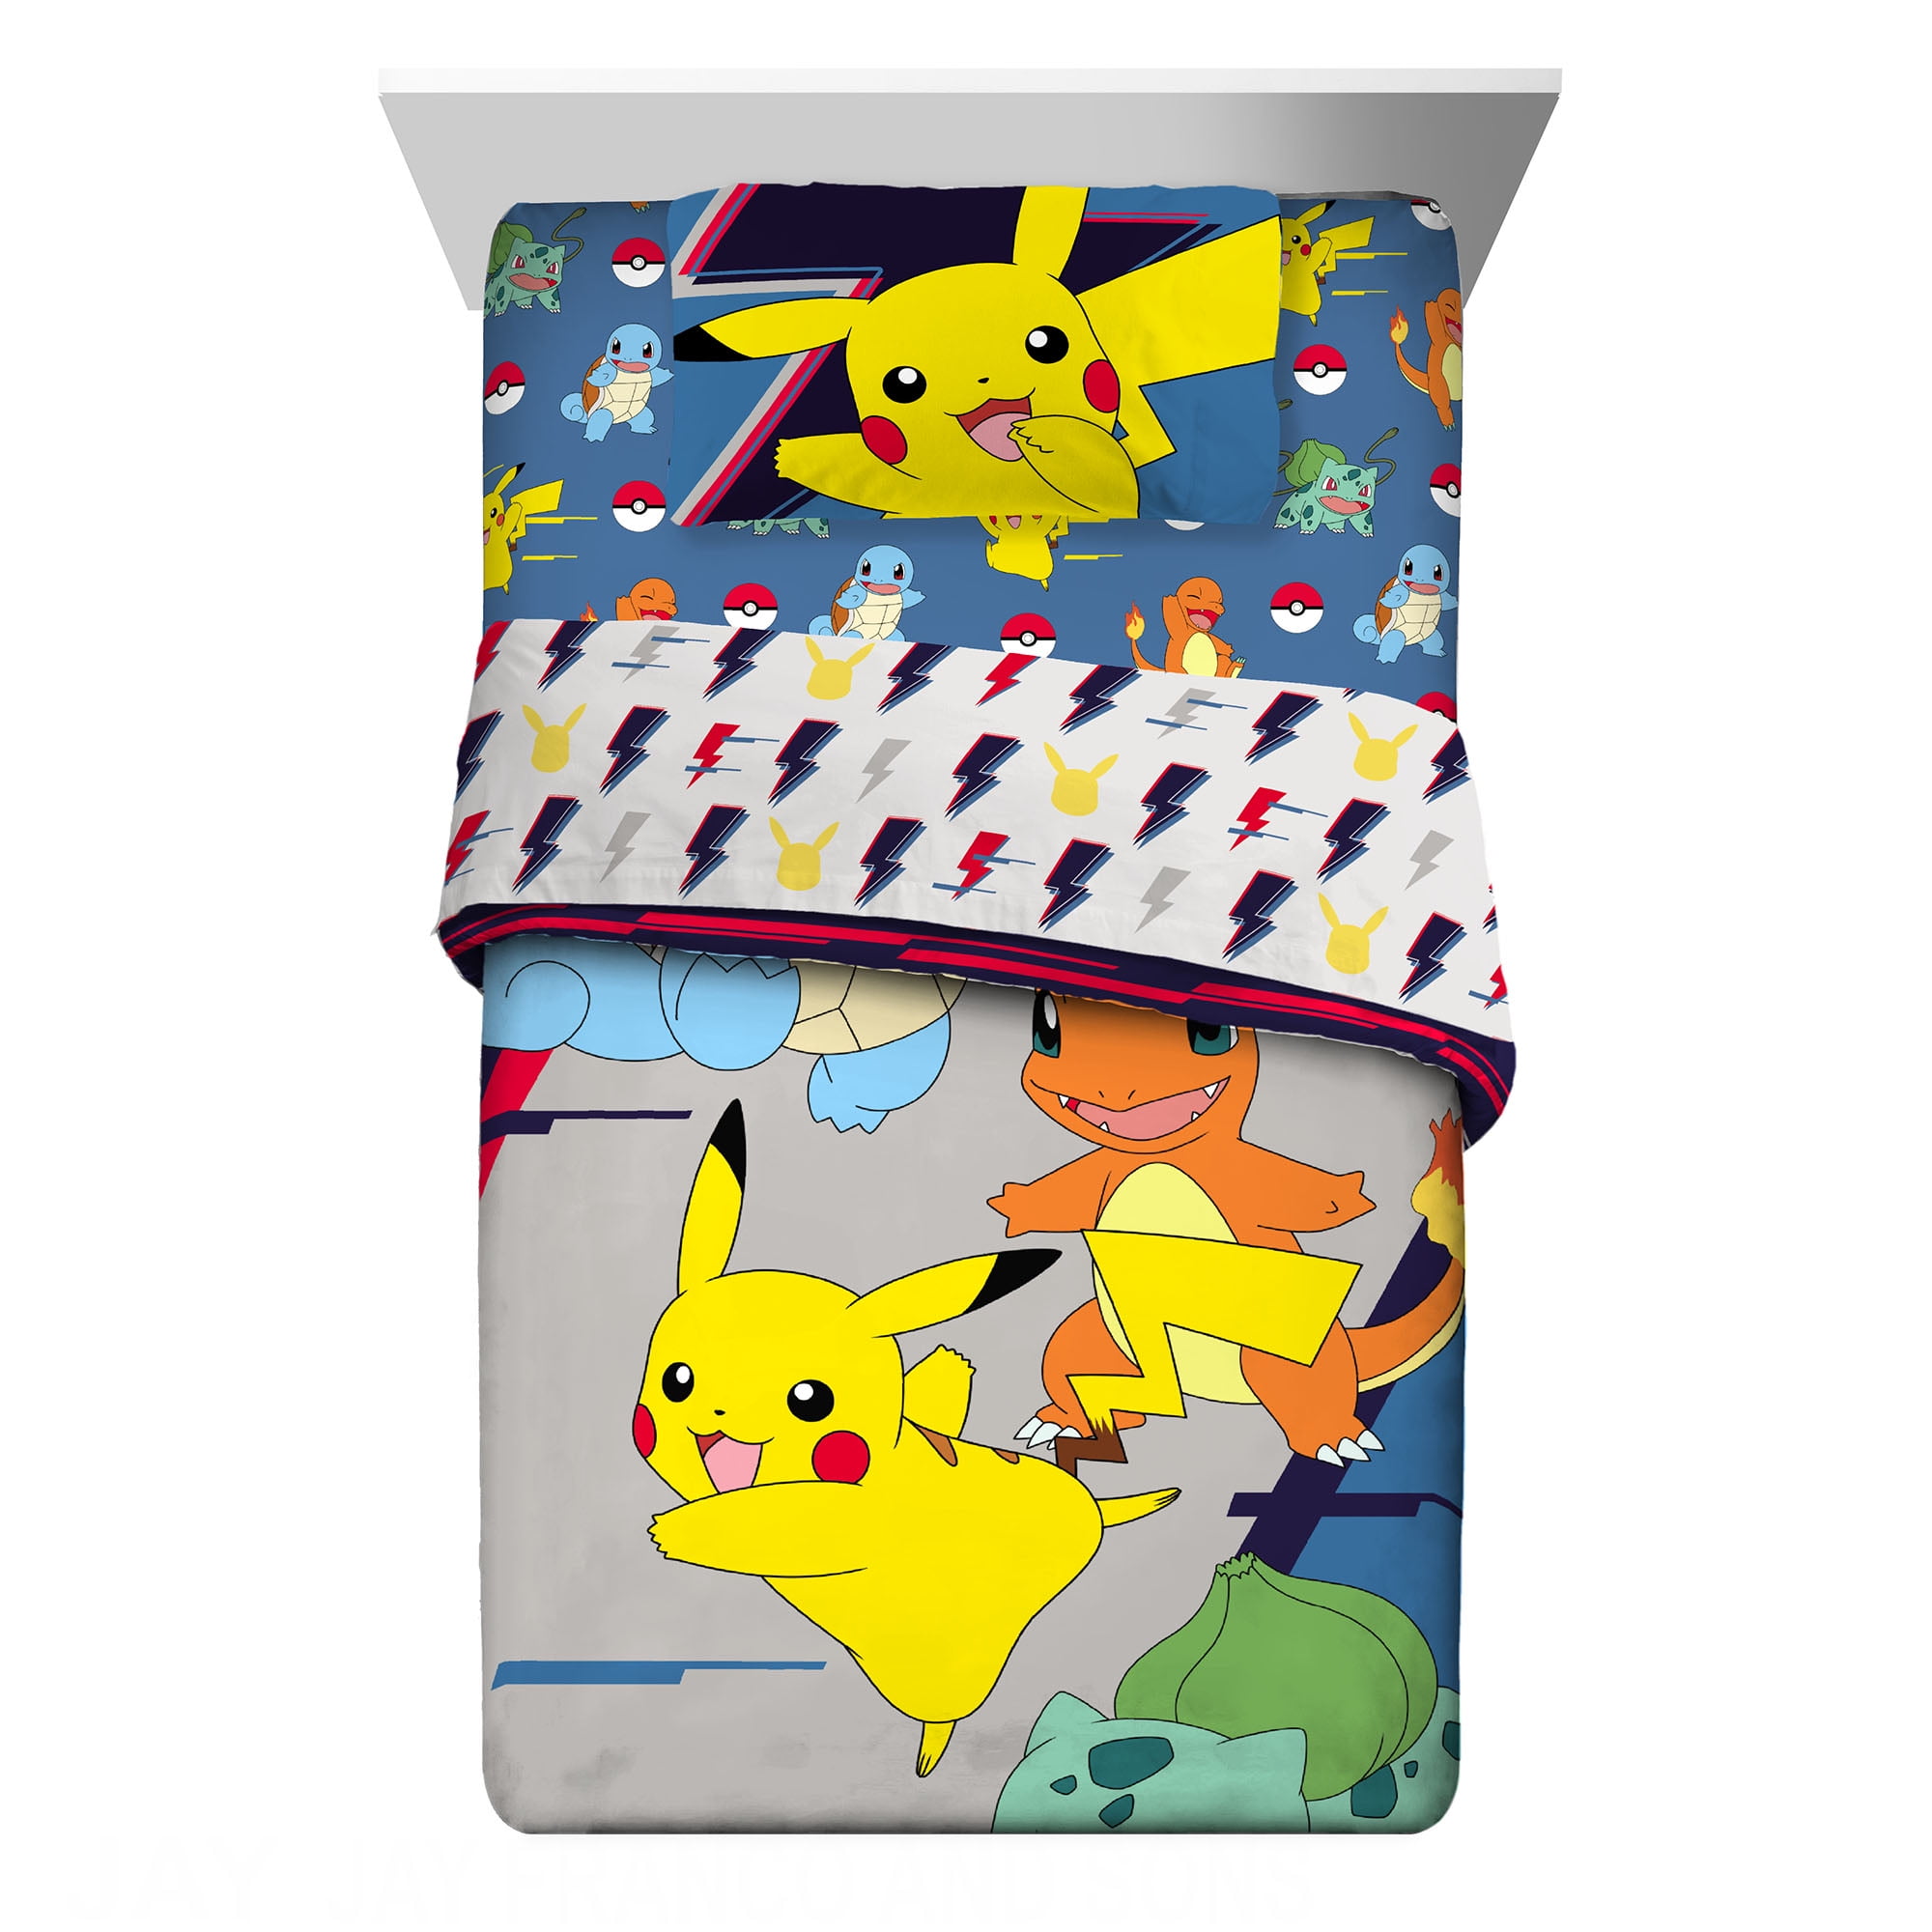 New Twin Pokemon Comforter Pillowcase Sheets Bed in a Bag Set Kid Boy Girl Gift 